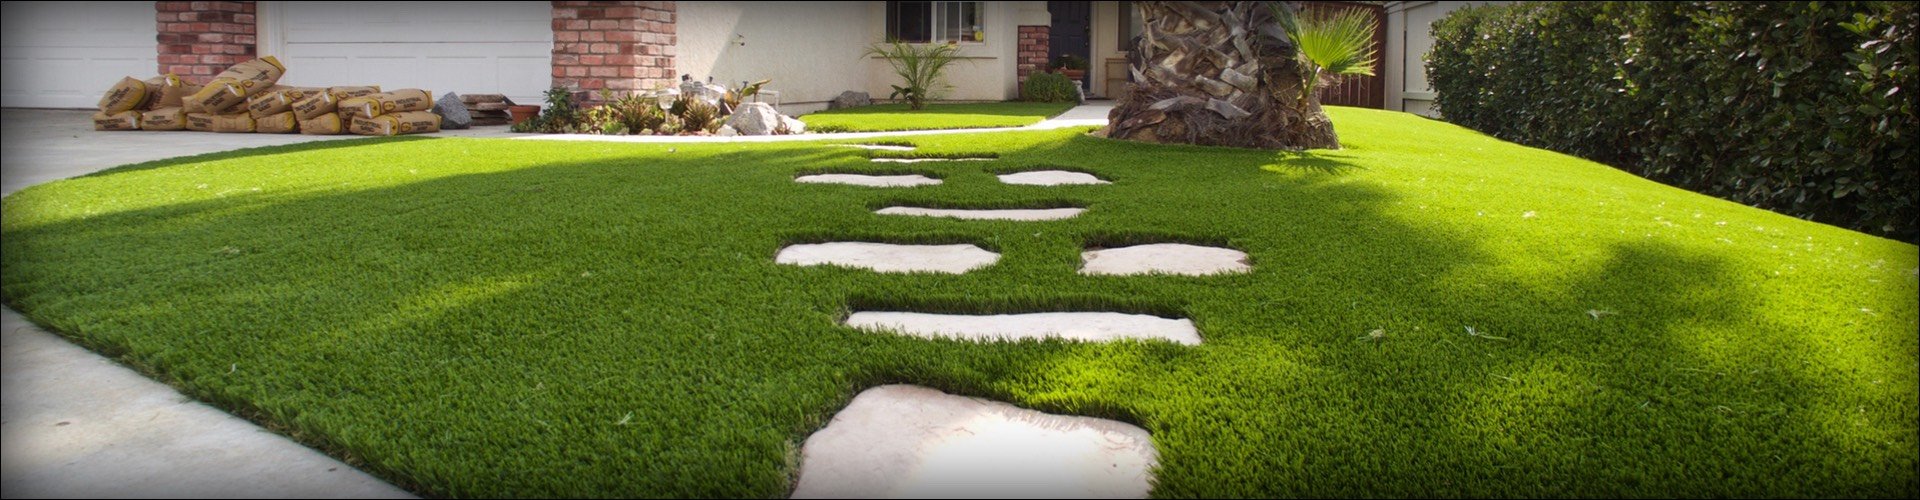 Why We Don't Recommend Artificial Grass for Most People in 2022   Reviews  by Wirecutter